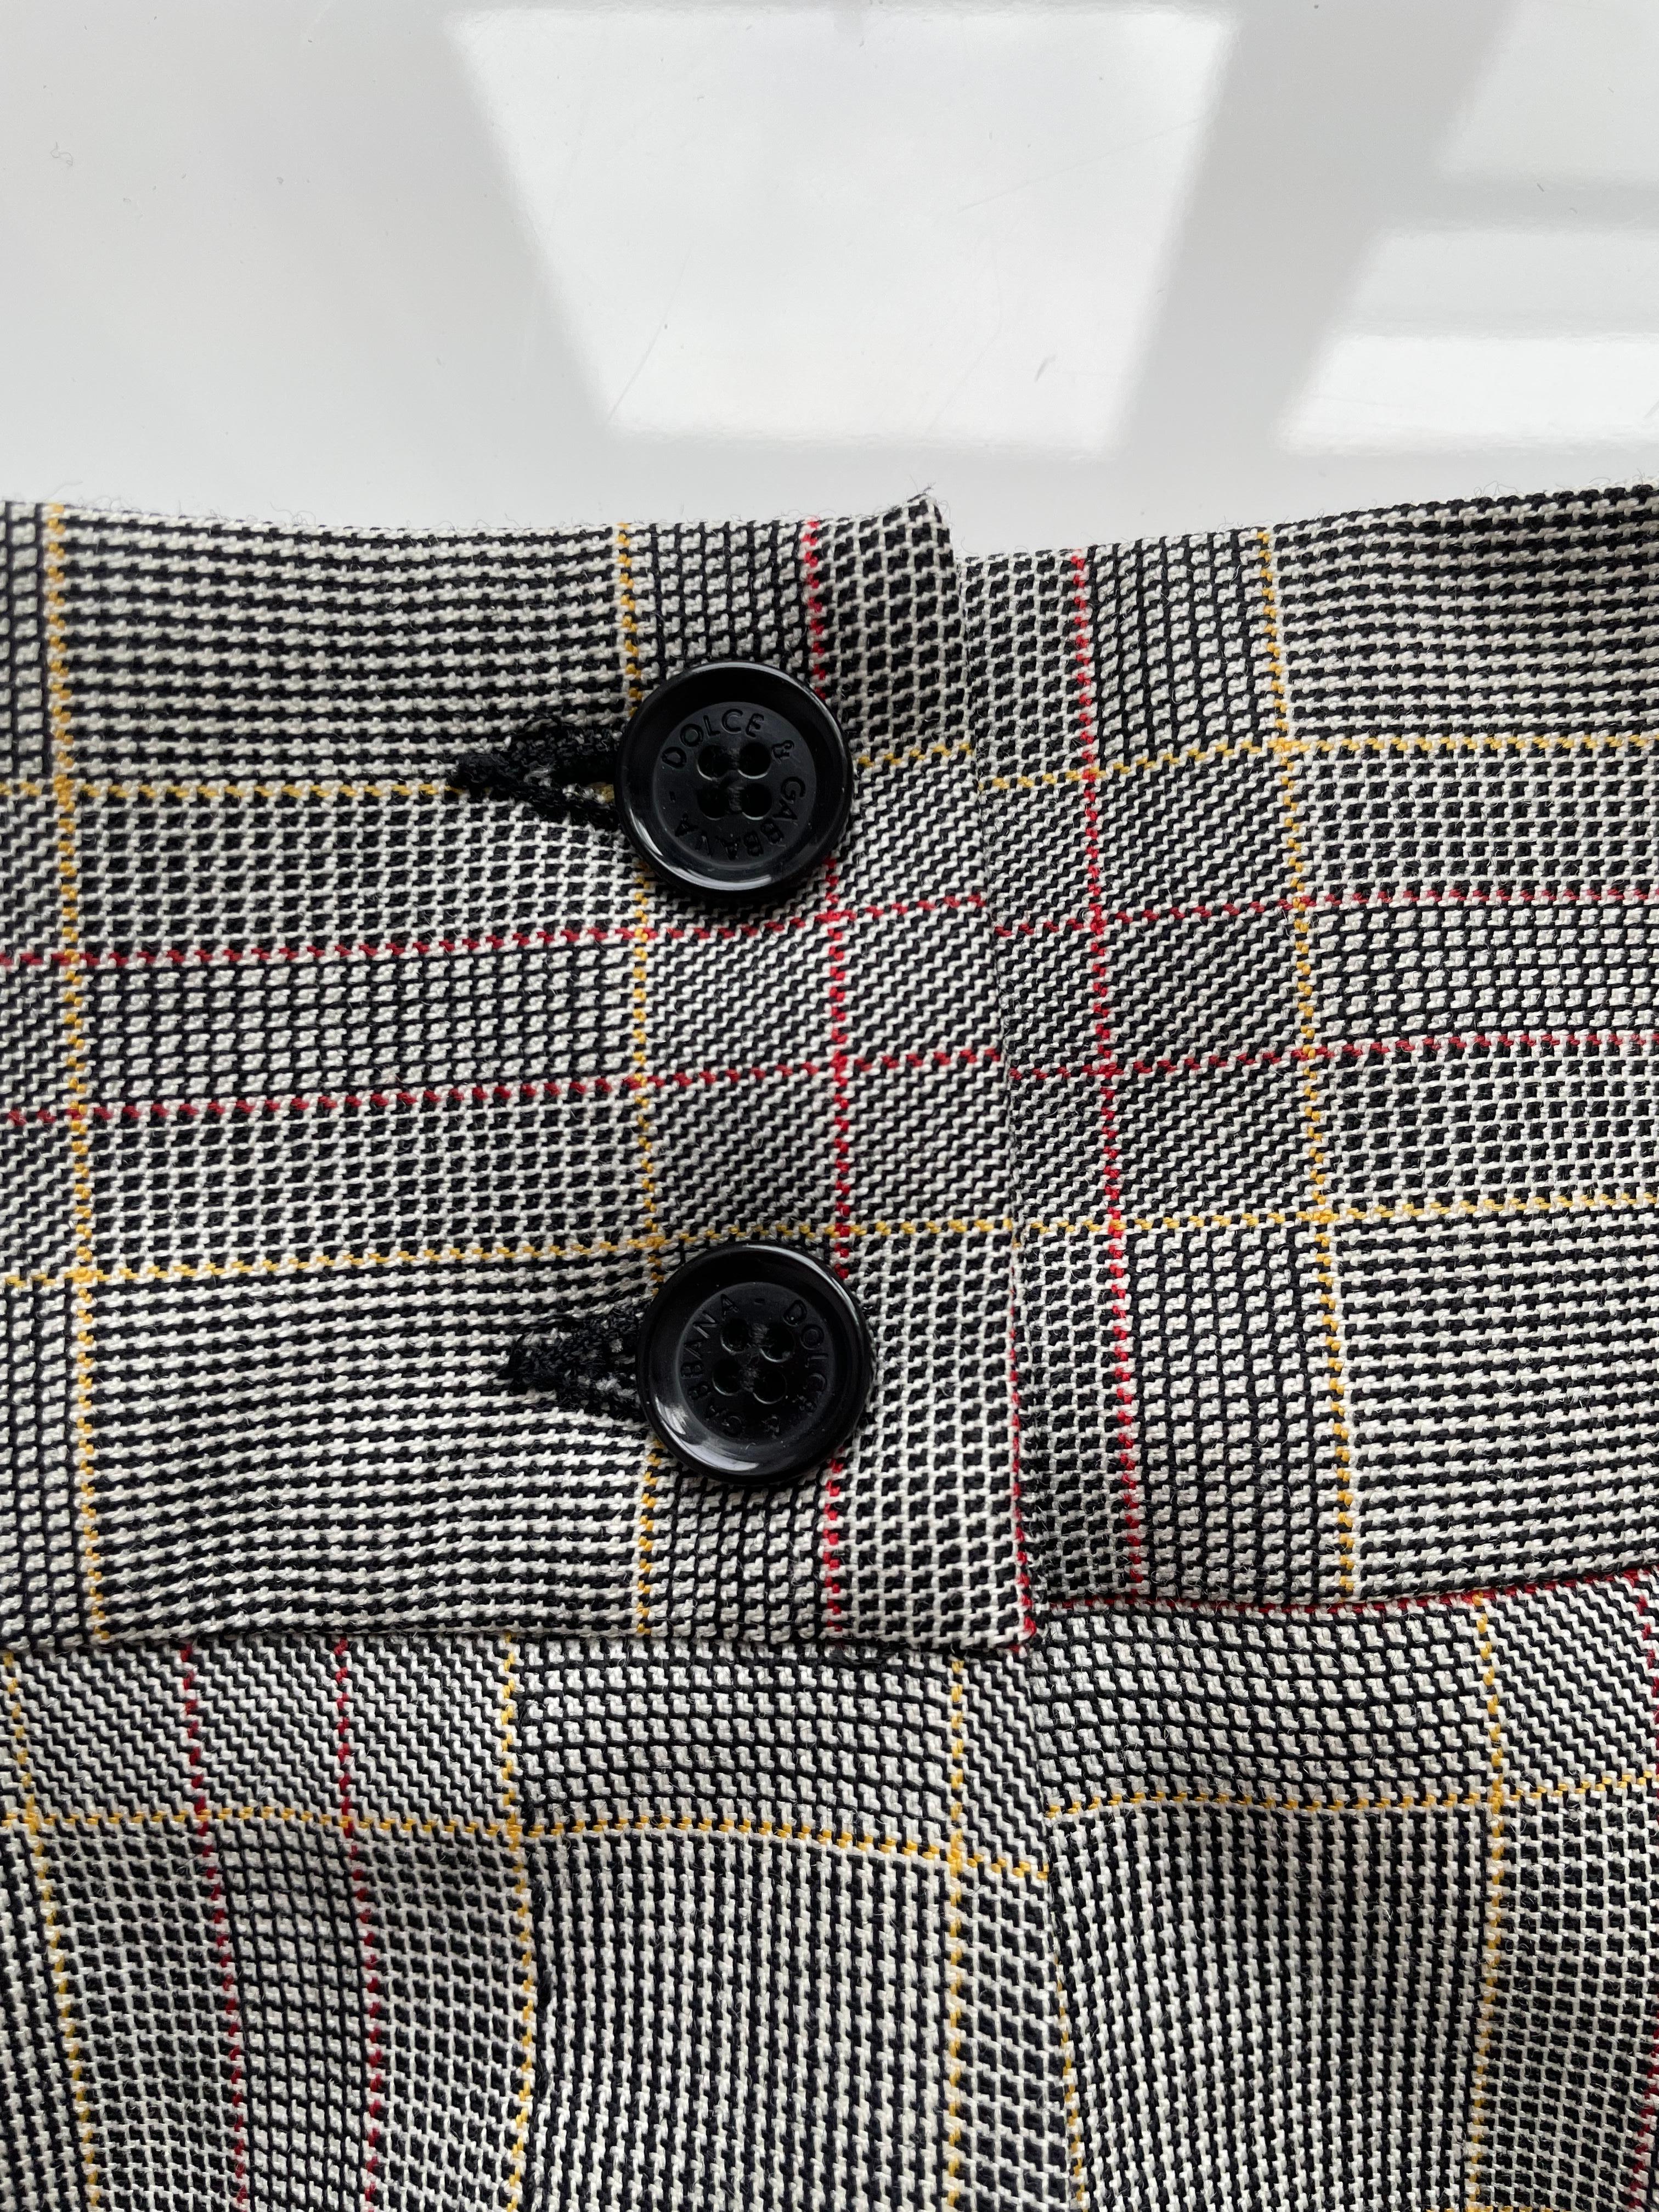 Dolce and Gabbana Wool Plaid Peak Lapel Blazer with Matching Pants Suit For Sale 8